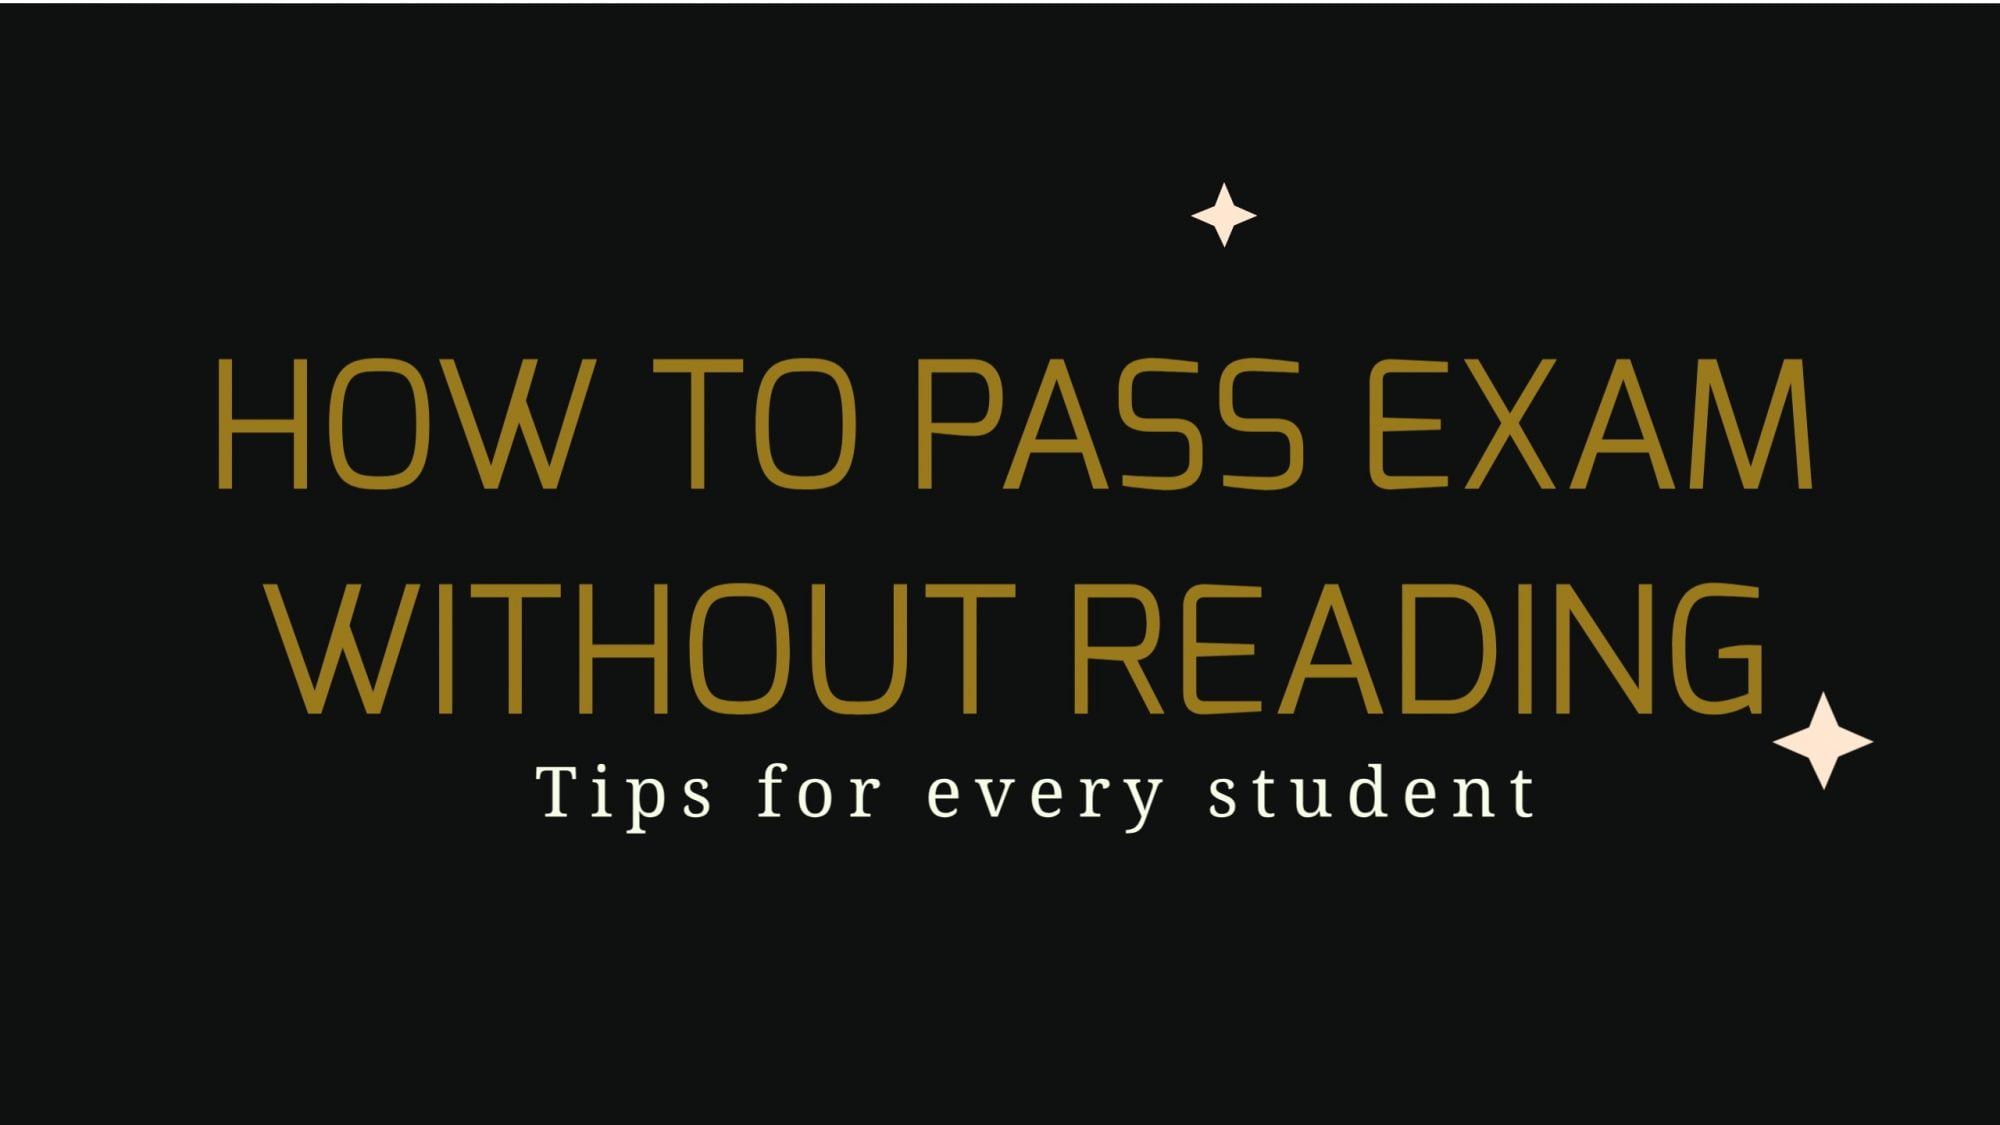 How To Pass Exam Without Reading: 7 Effective Tips